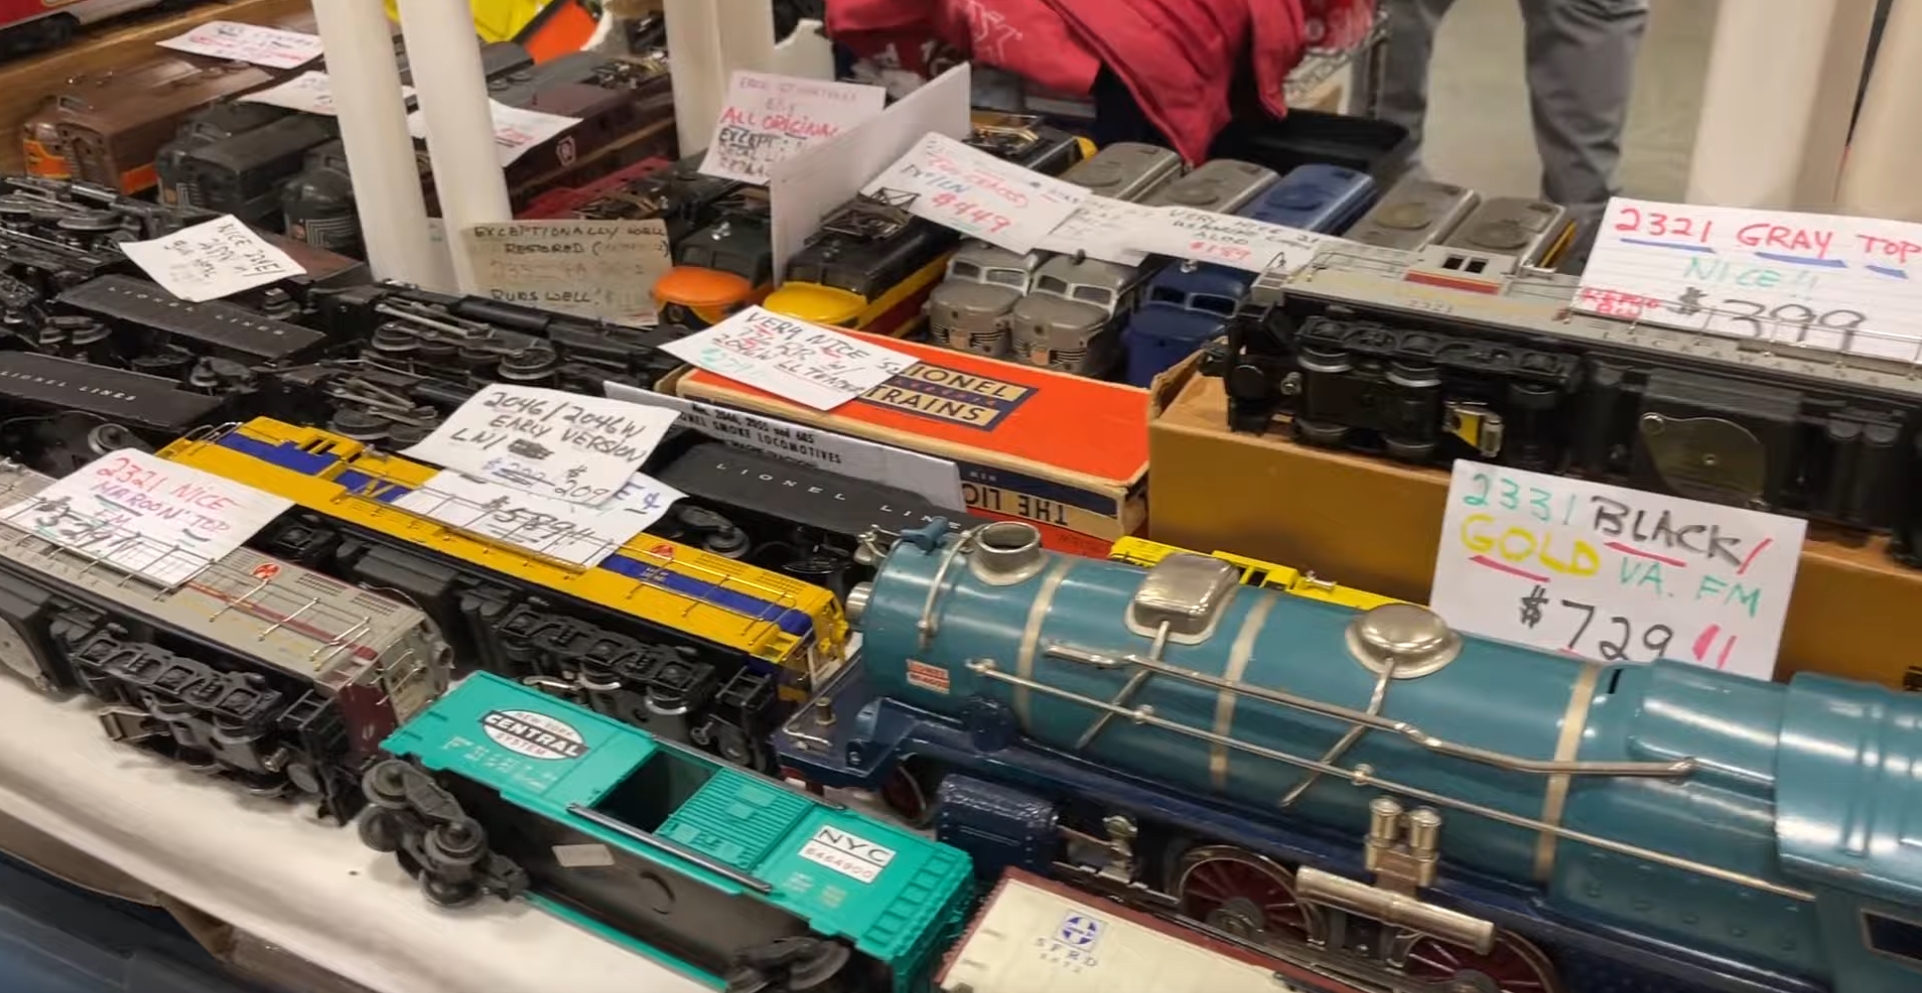 Greenberg’s Great Train & Toy Show, 11 – 12 Mar 2023, The New Jersey Convention and Exposition Center, Edison, USA